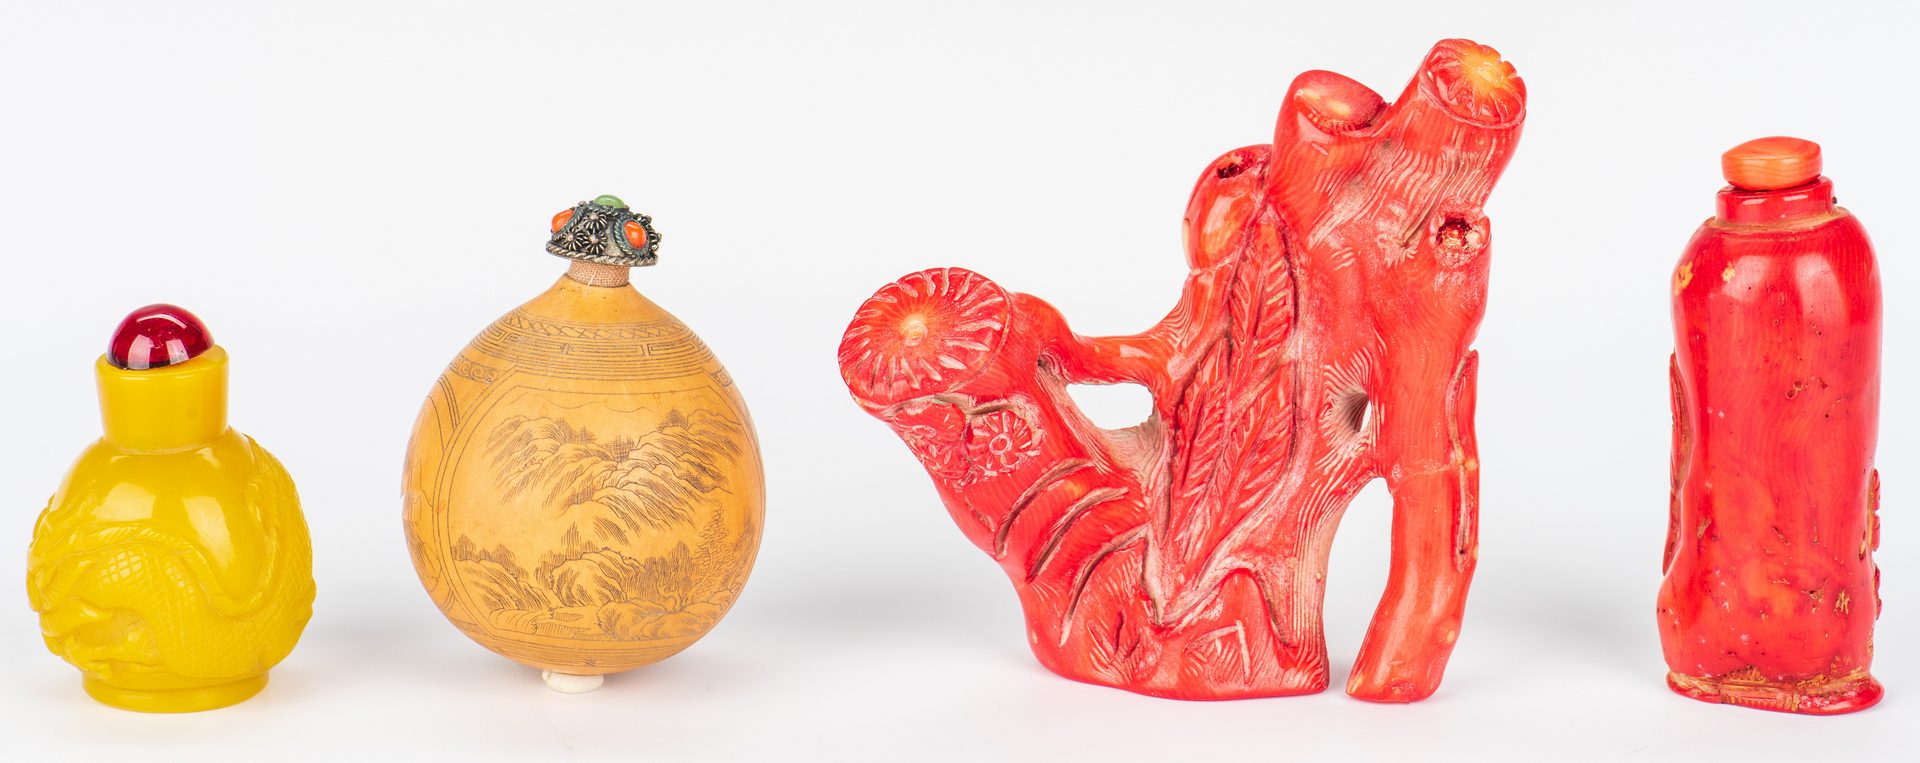 Lot 381: 7 Asian Snuff Bottles & 1 Carved Coral Figure, 8 pcs.